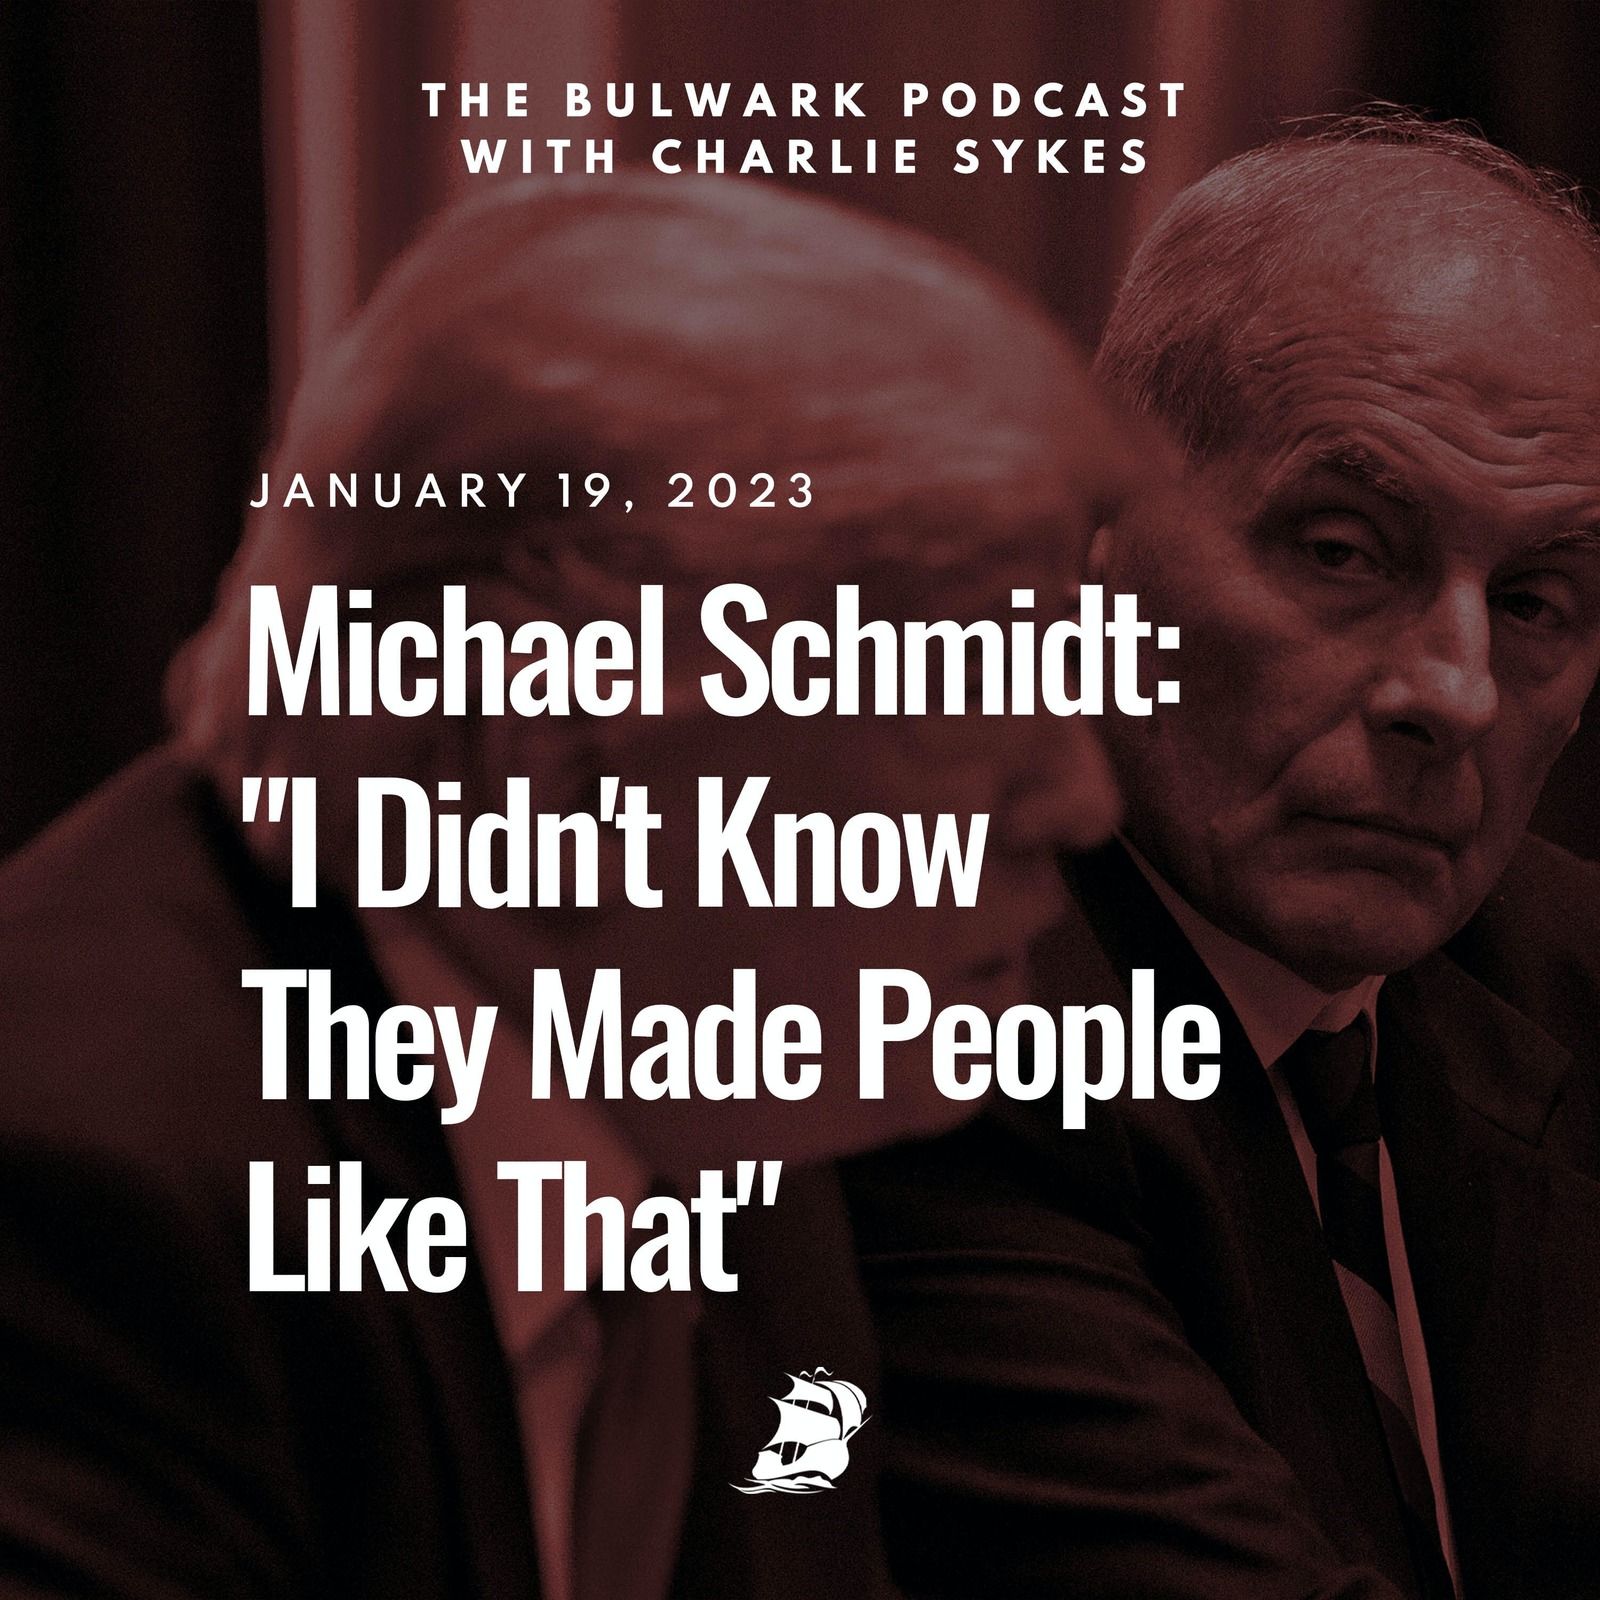 Michael Schmidt: "I Didn't Know They Made People Like That" by The Bulwark Podcast